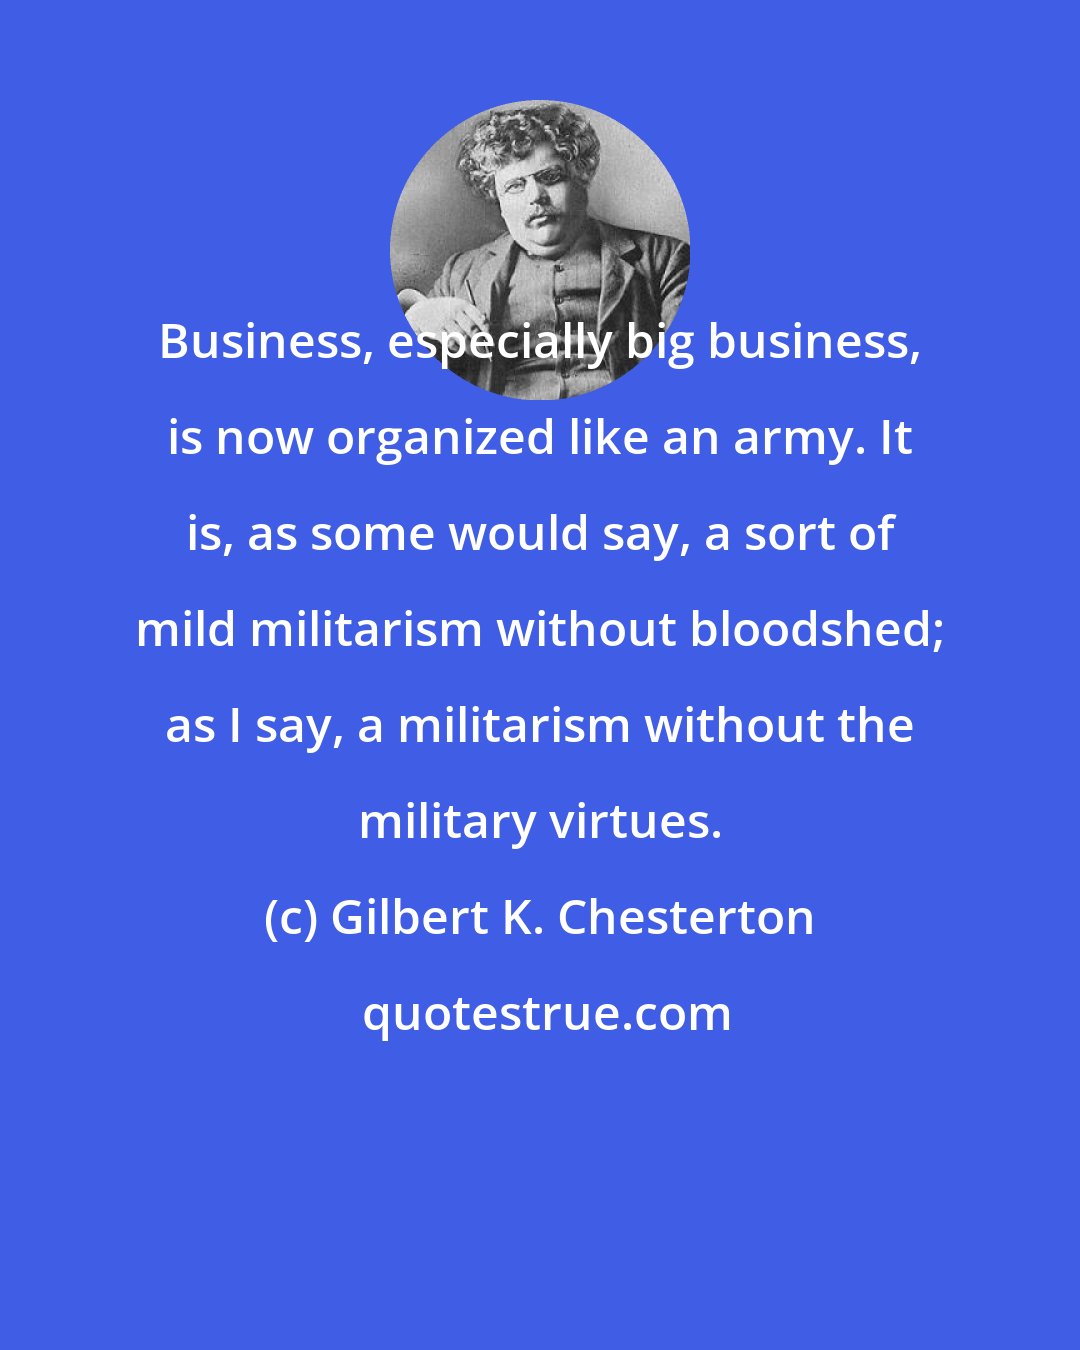 Gilbert K. Chesterton: Business, especially big business, is now organized like an army. It is, as some would say, a sort of mild militarism without bloodshed; as I say, a militarism without the military virtues.